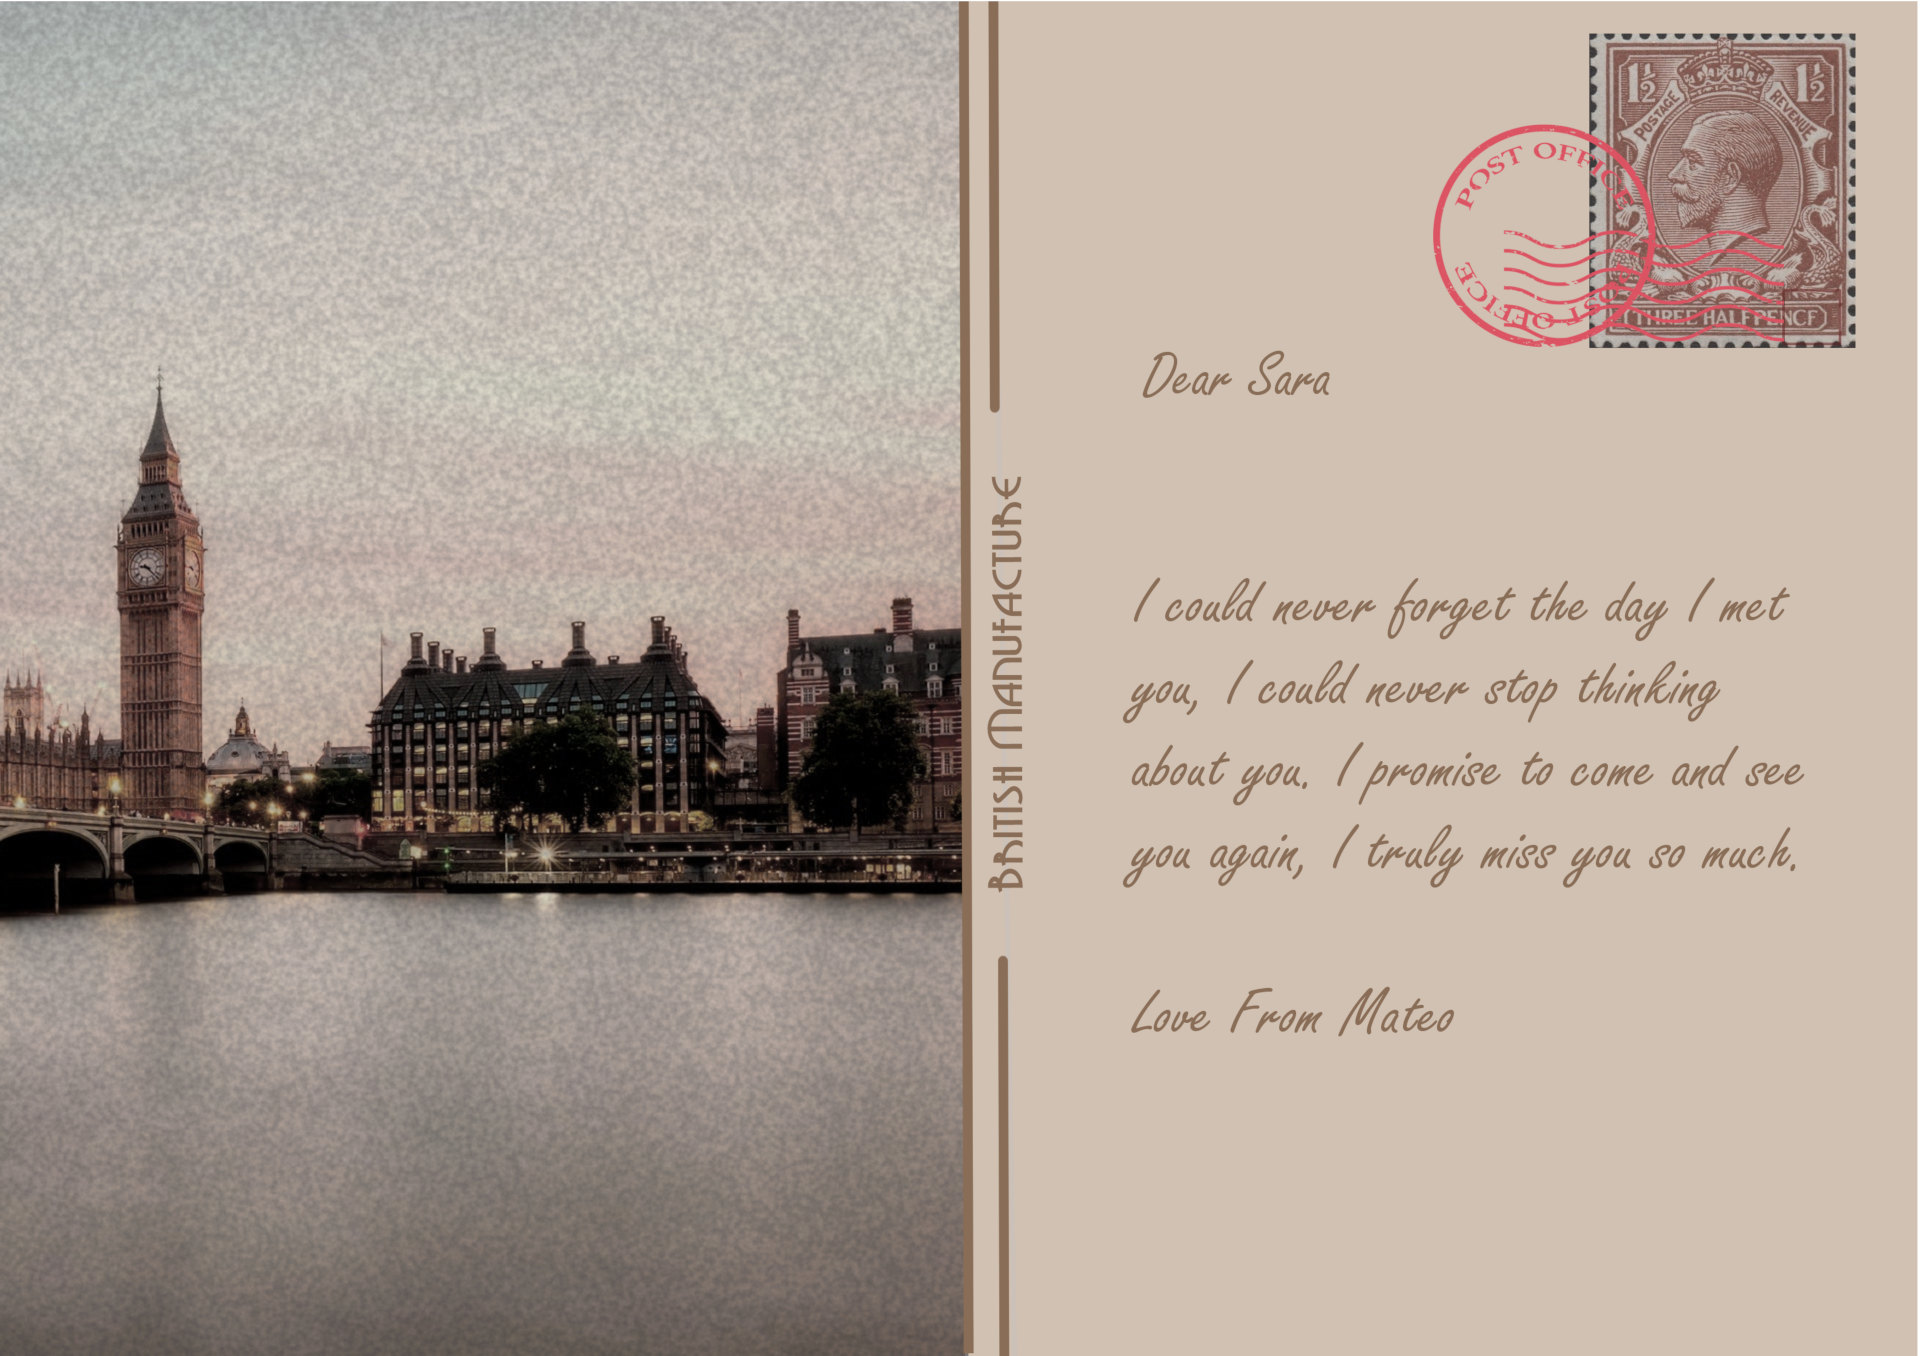 A postcard of Westminster from Mateo to Sara